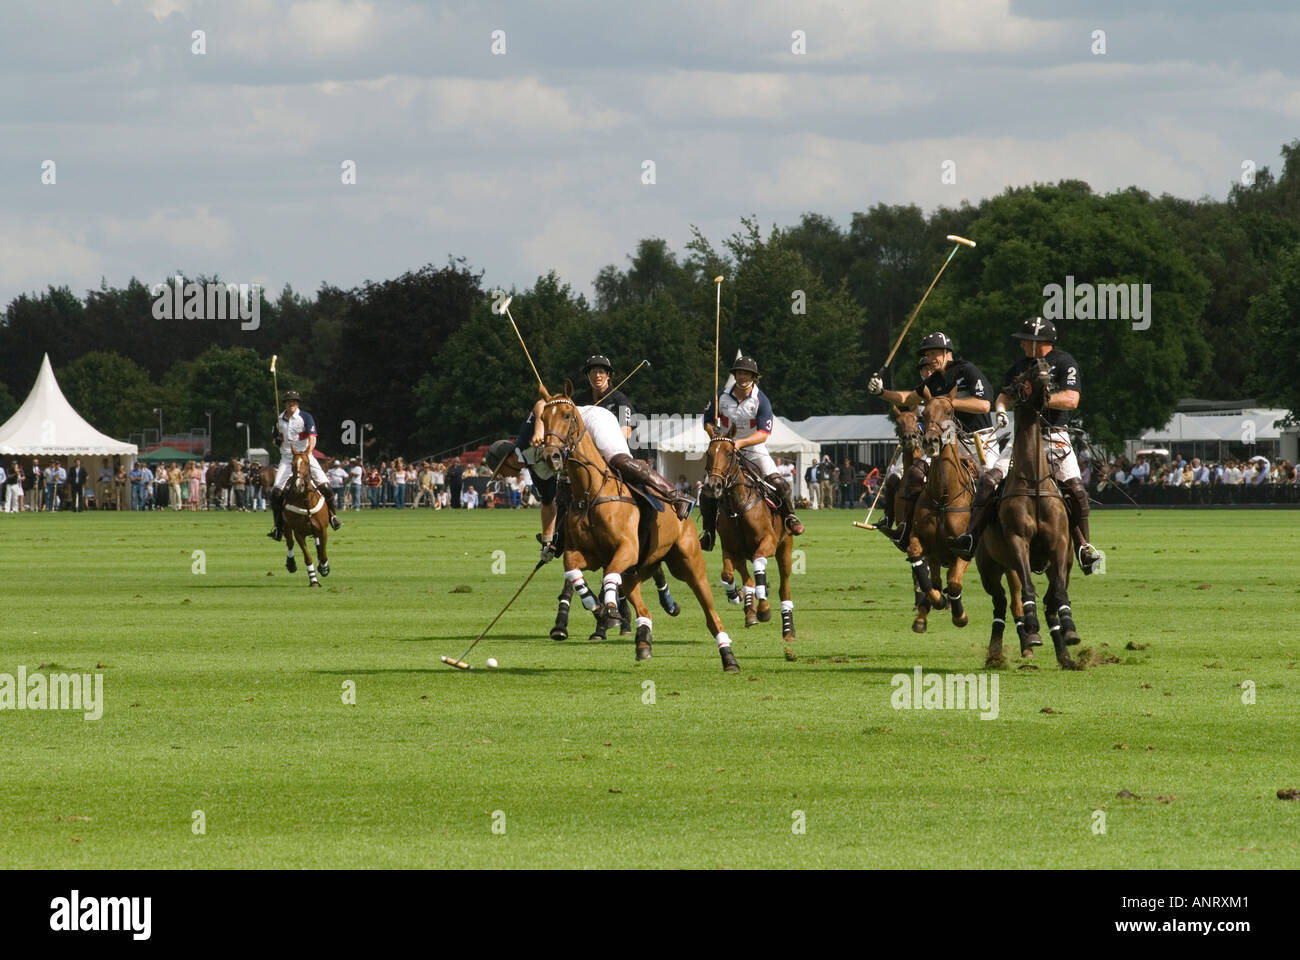 Polo horses Cartier International Polo at the Guards Club Smiths Lawn Windsor Great Park Egham Surrey England 2000s 2006 HOMER SYKES Stock Photo